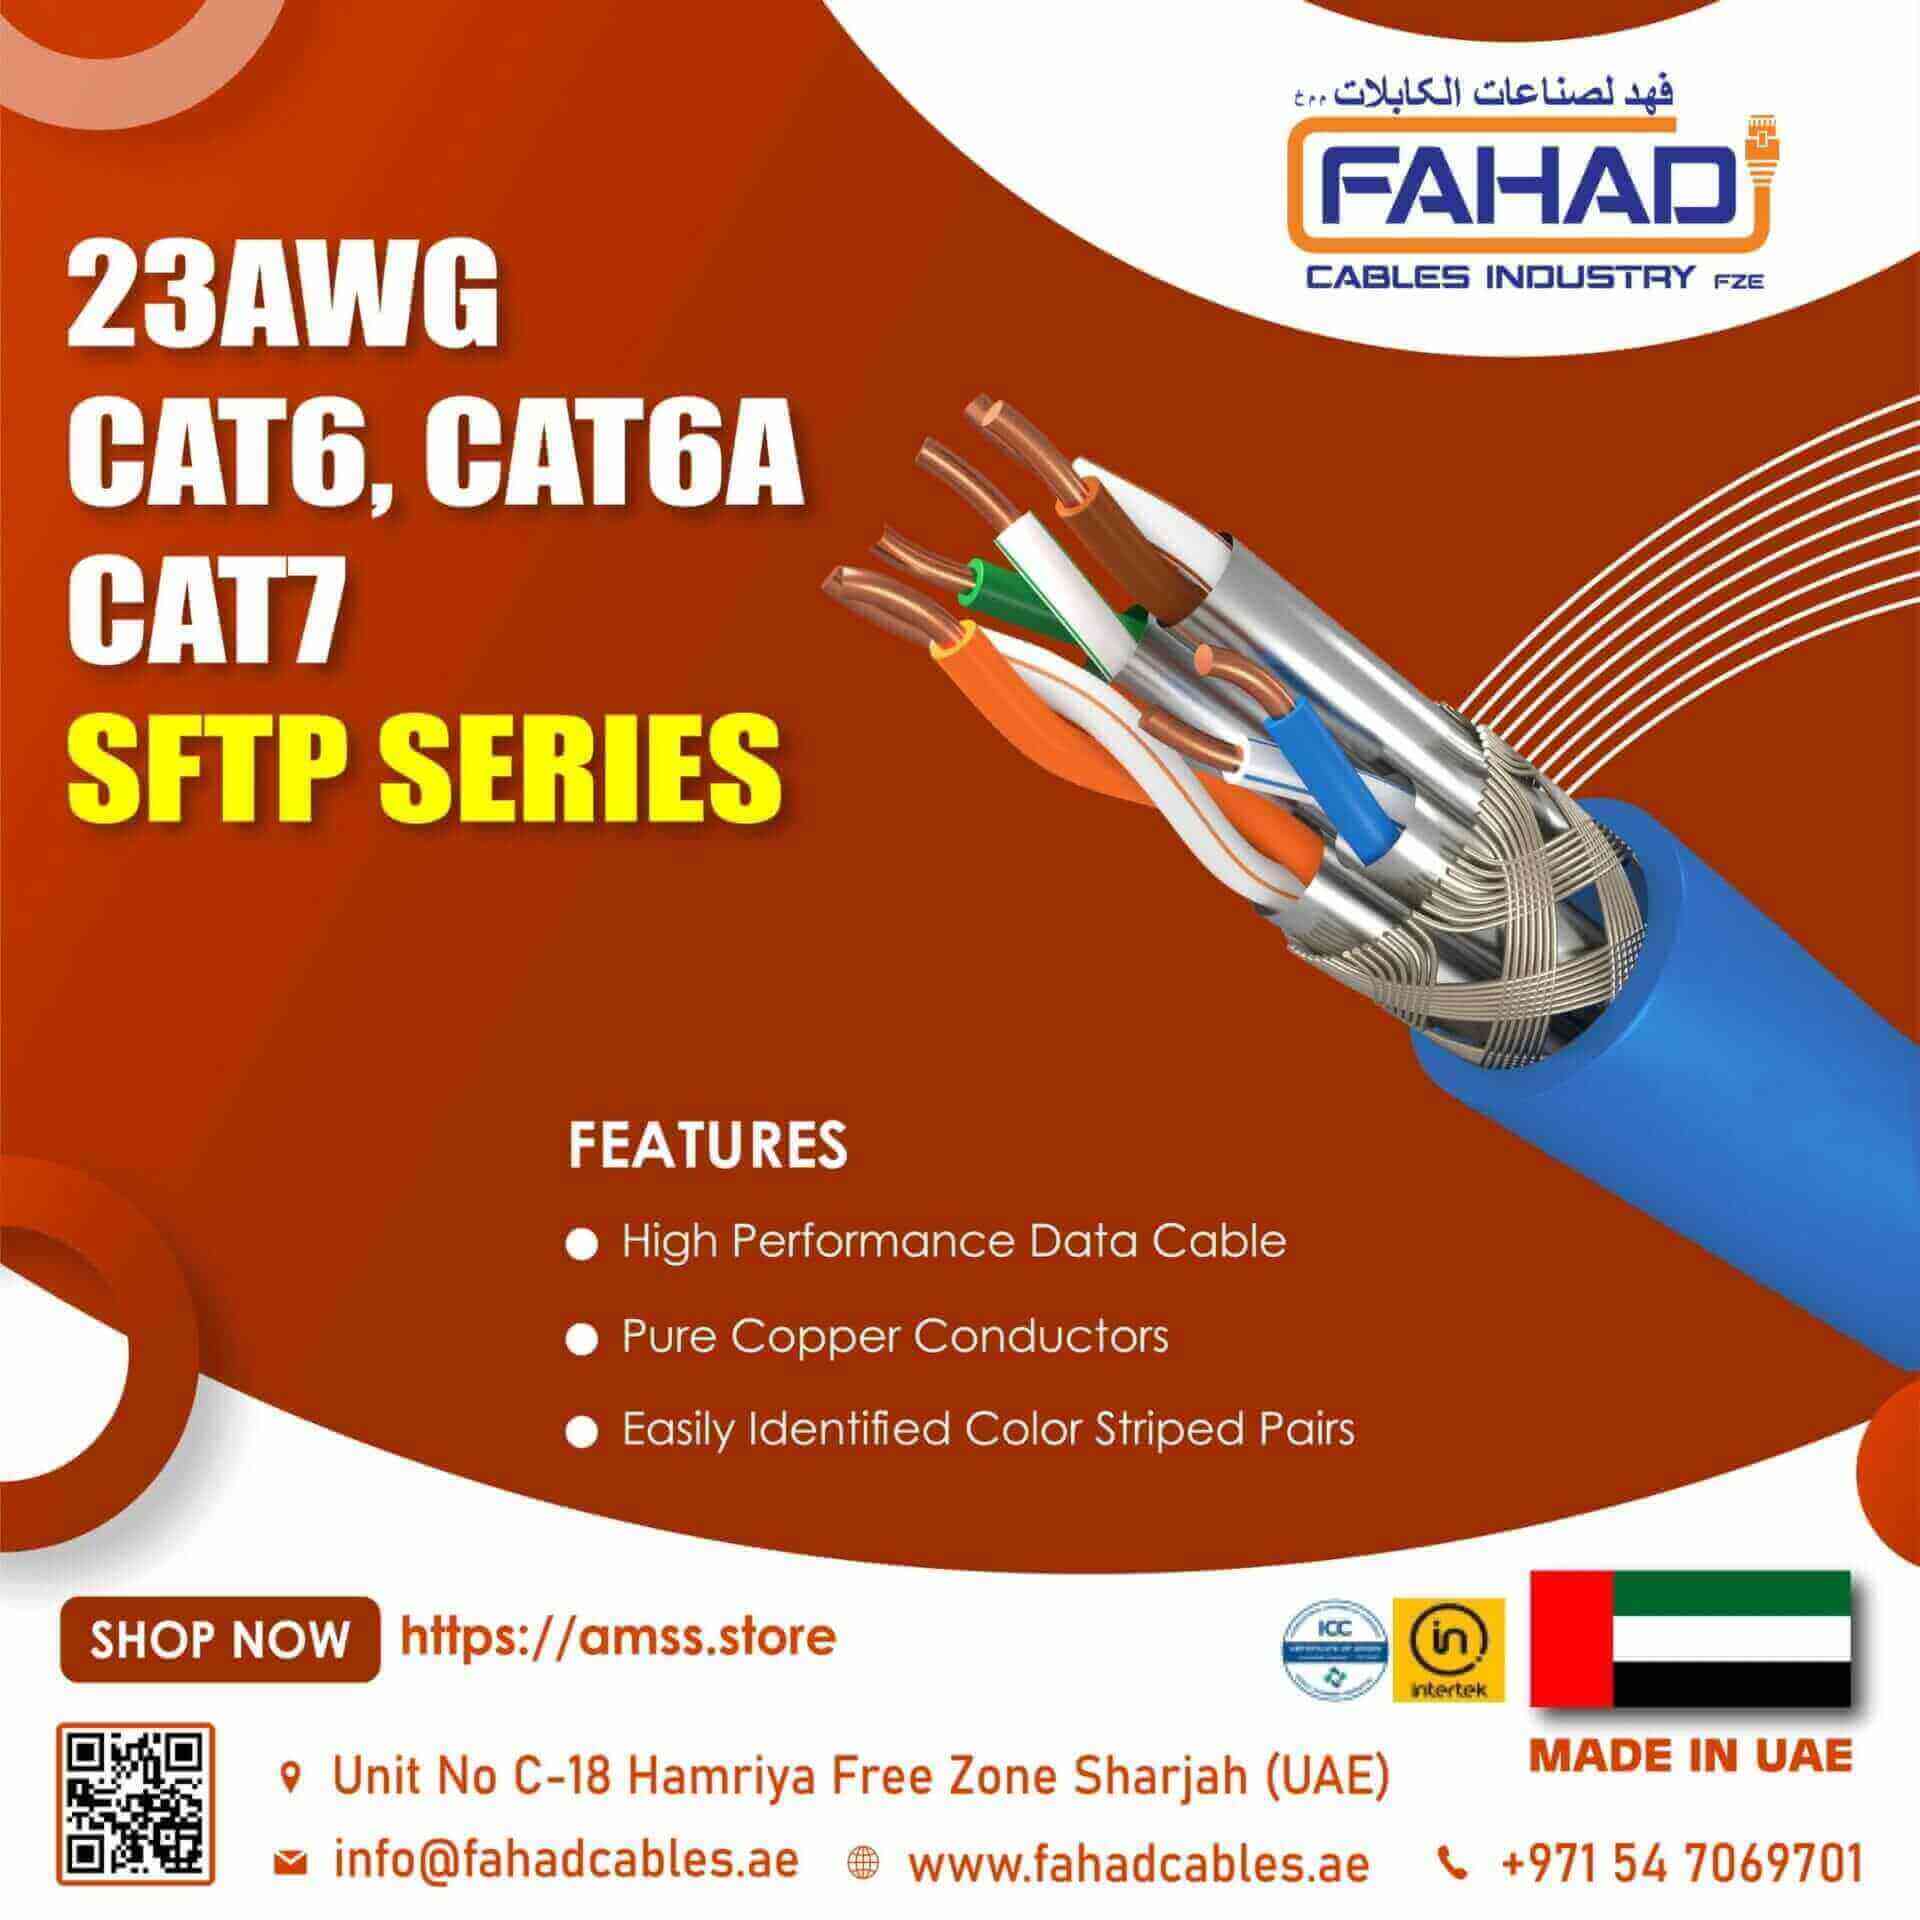 Category6 Category6a Category7 23awg sftp series elv cable, tmt global, tmt, fahad cables industry fze, ethernet cable, ethernet cable color code,cat6 ethernet cable,cat8 ethernet cable, ethernet cable cat6,cables ethernet, network cable, network cable color code, network cable connector, network cable patch cord,48 port cat5e patch panel,cat5e ethernet cable, outdoor cat5e,cat3 rj11,cat3 patch panel,cat6 cable,cat6,cat6 color code, best cat6 cable,cat6 awg size,cat6 connector types,23awg vs 24awg cat6,23awg cat6 cable,cat6 23awg,23awg cat6,23awg cat6 rj45 connector,cat6 24awg,24awg cat6,cat6 u utp,cat6 u utp cable,cat6 sftp,cat6 sftp cable,cat6 sftp cable specification,cat6a cable,cat6 vs cat6a speed,cat6a rj45 connector,cat6a female connector,cat6a outdoor cable,cat6a ftp vs utp,cat6a utp,cat6a f utp,cat6a sftp cable,cat6a sftp, outdoor cat7,cat6 vs cat7 cable,cat7 305m,